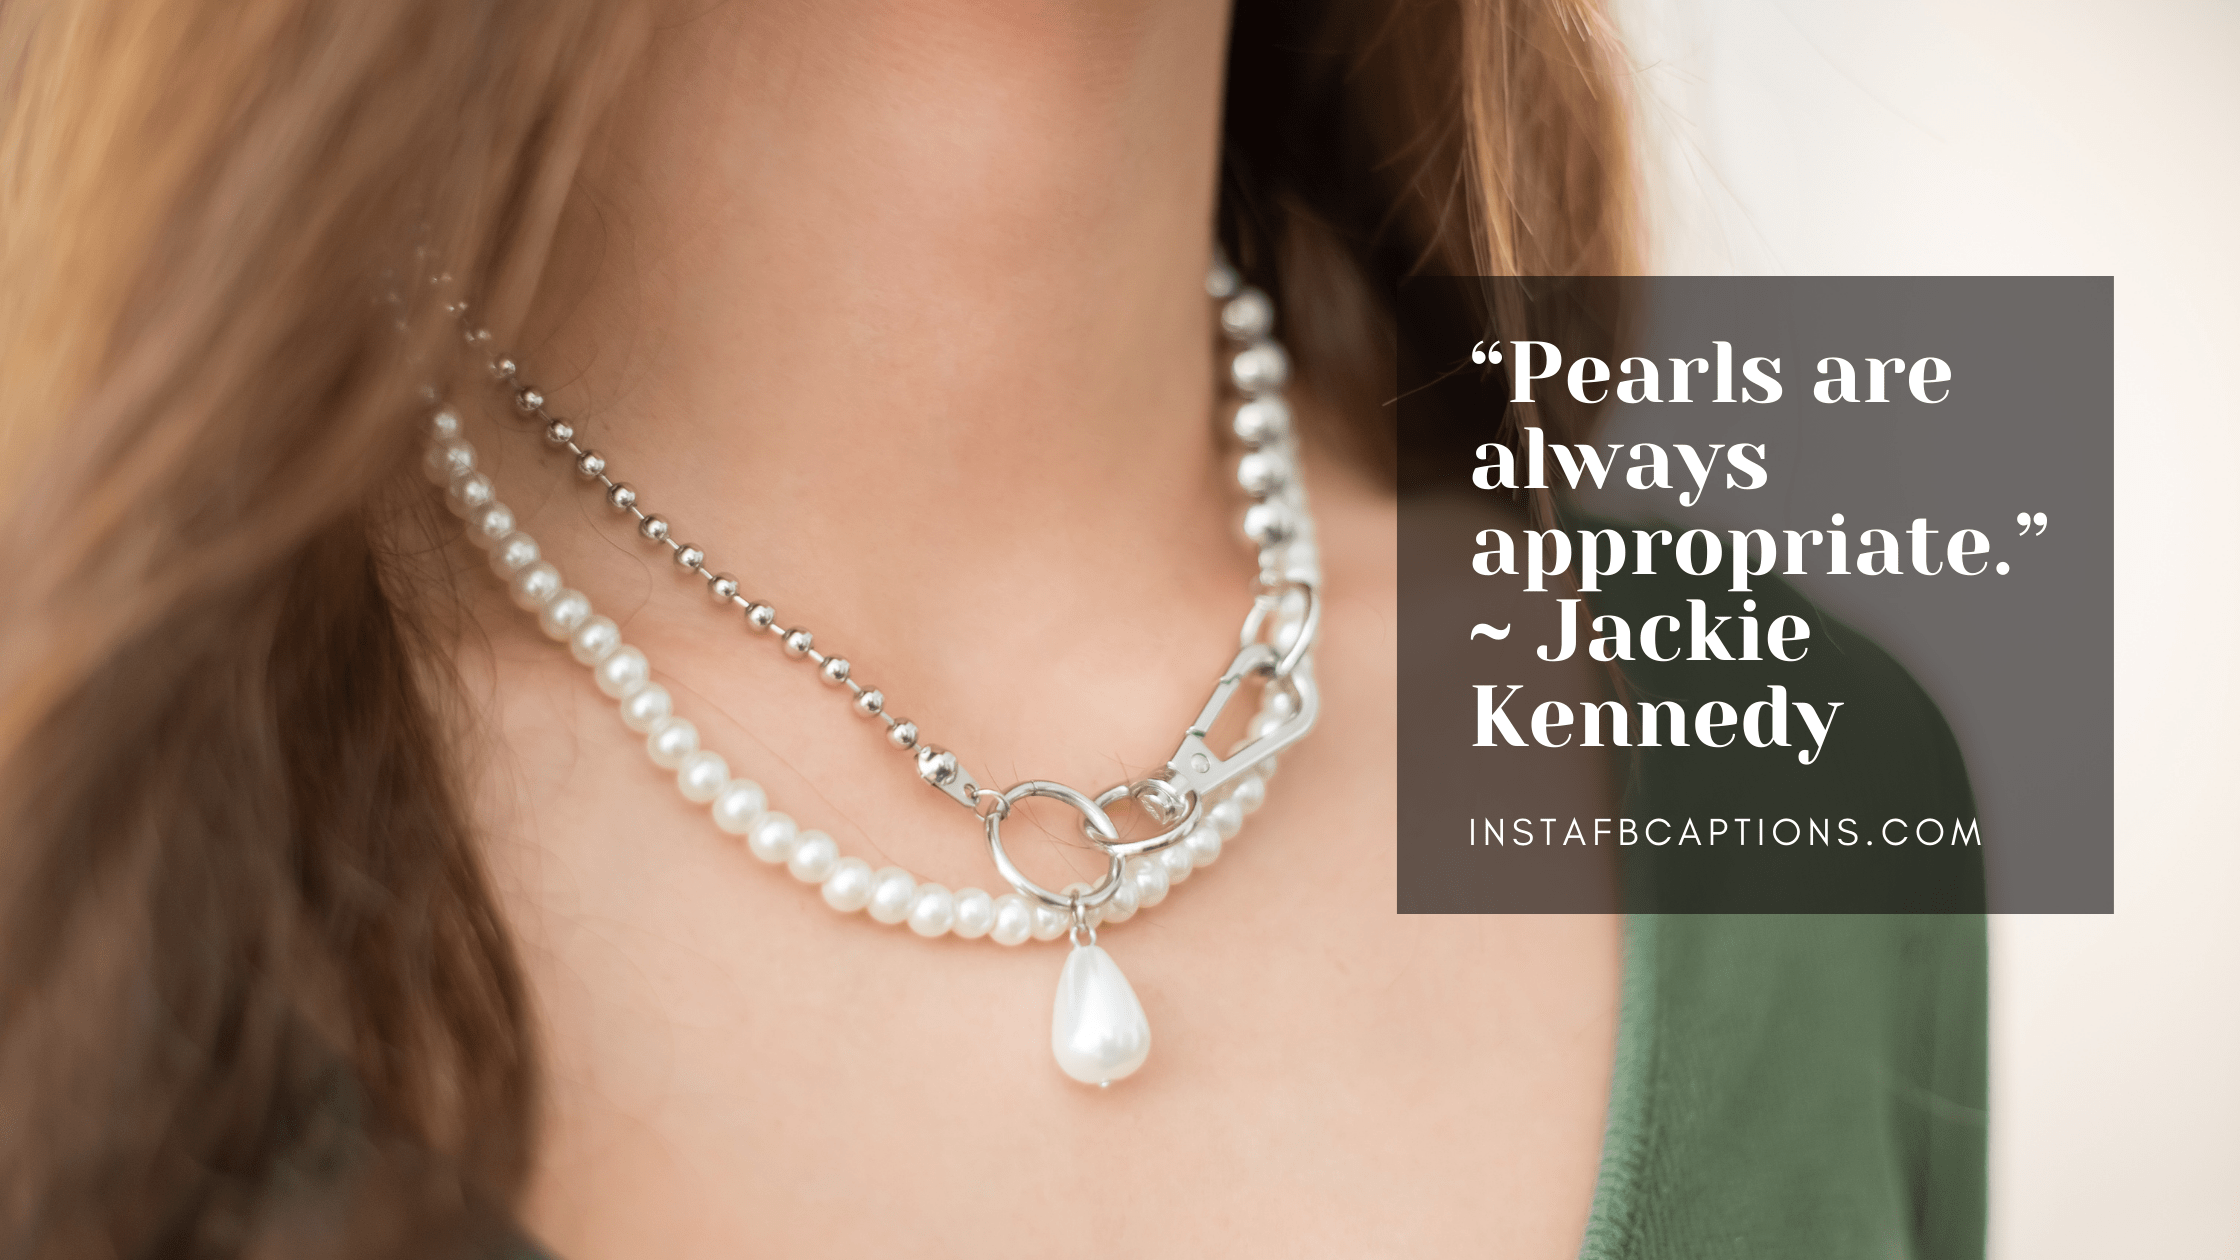 Pearl Jewelry Captions  - Pearl Jewelry Captions - 98 Jewellery Instagram Captions, Quotes, Hashtags in 2022